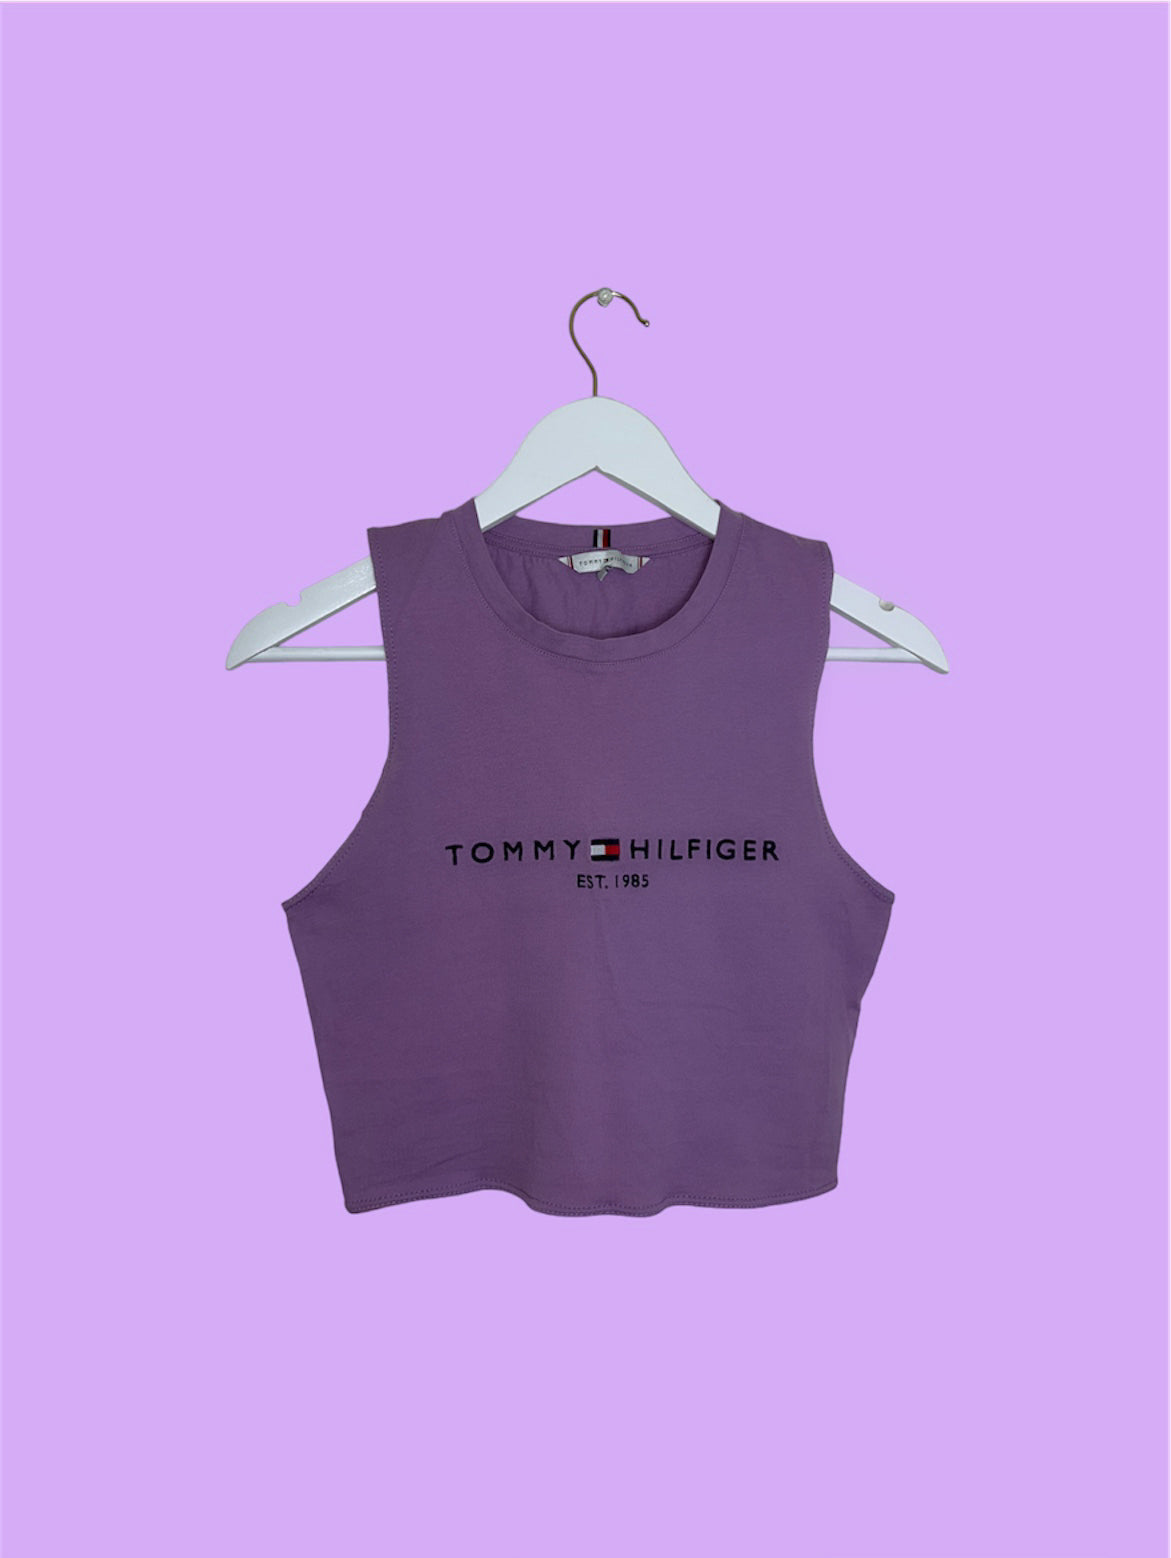 lilac sleeveless crop top with black tommy hilfiger logo shown on a lilac background